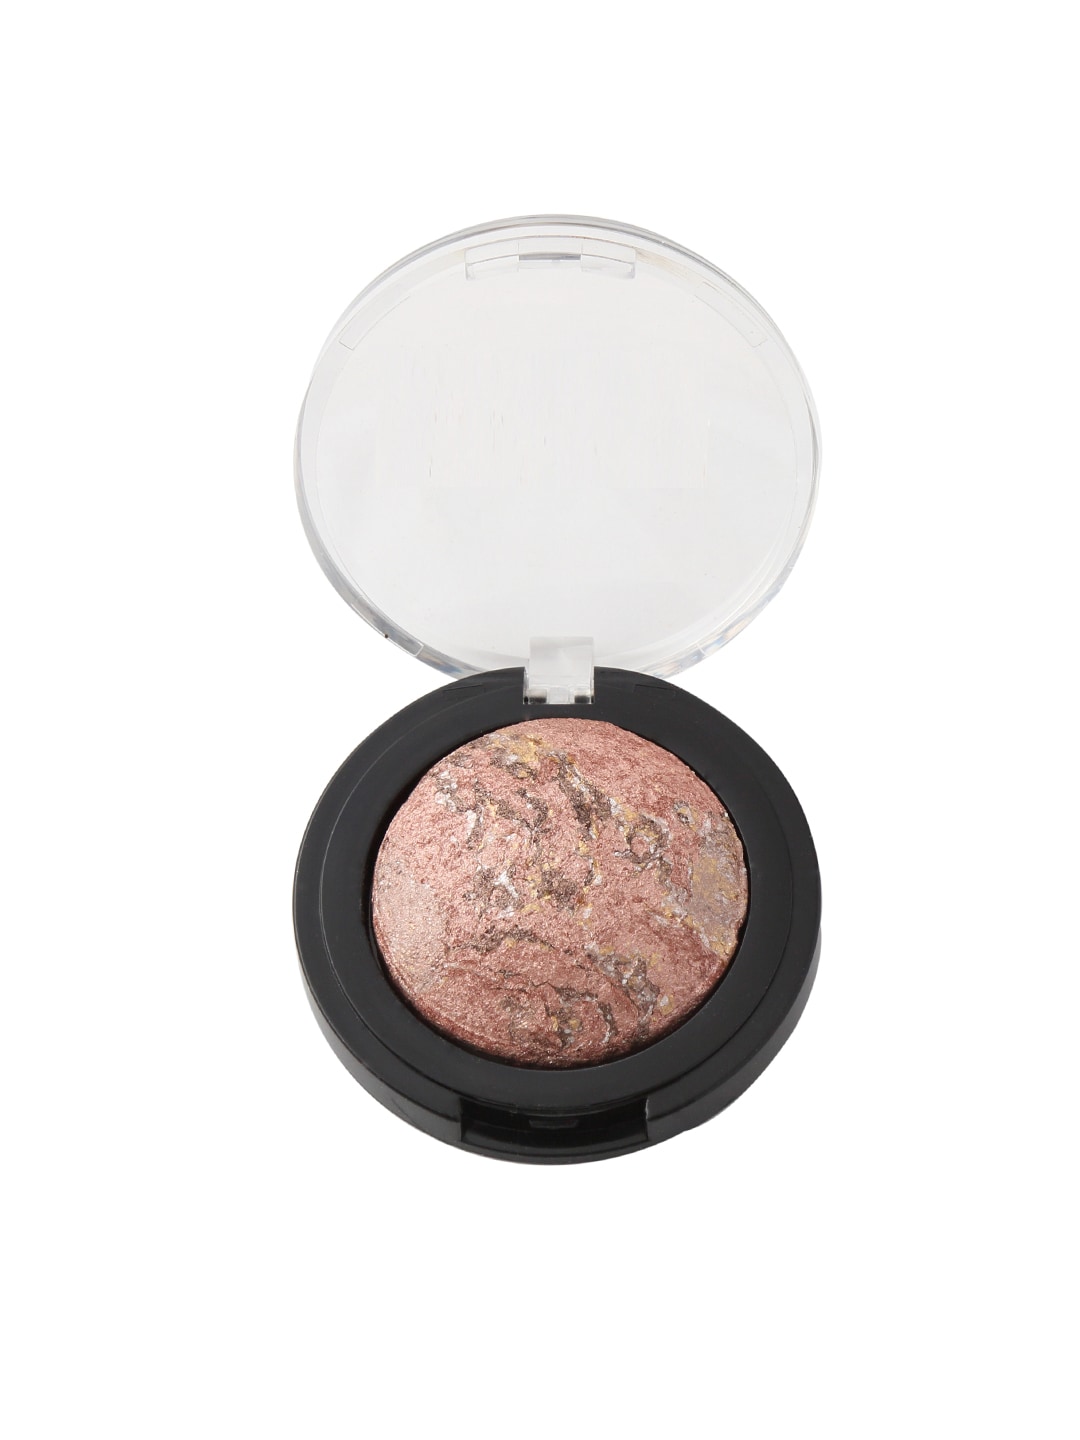 Miss Claire 09 Baked Eyeshadow Duo 3.5 g Price in India